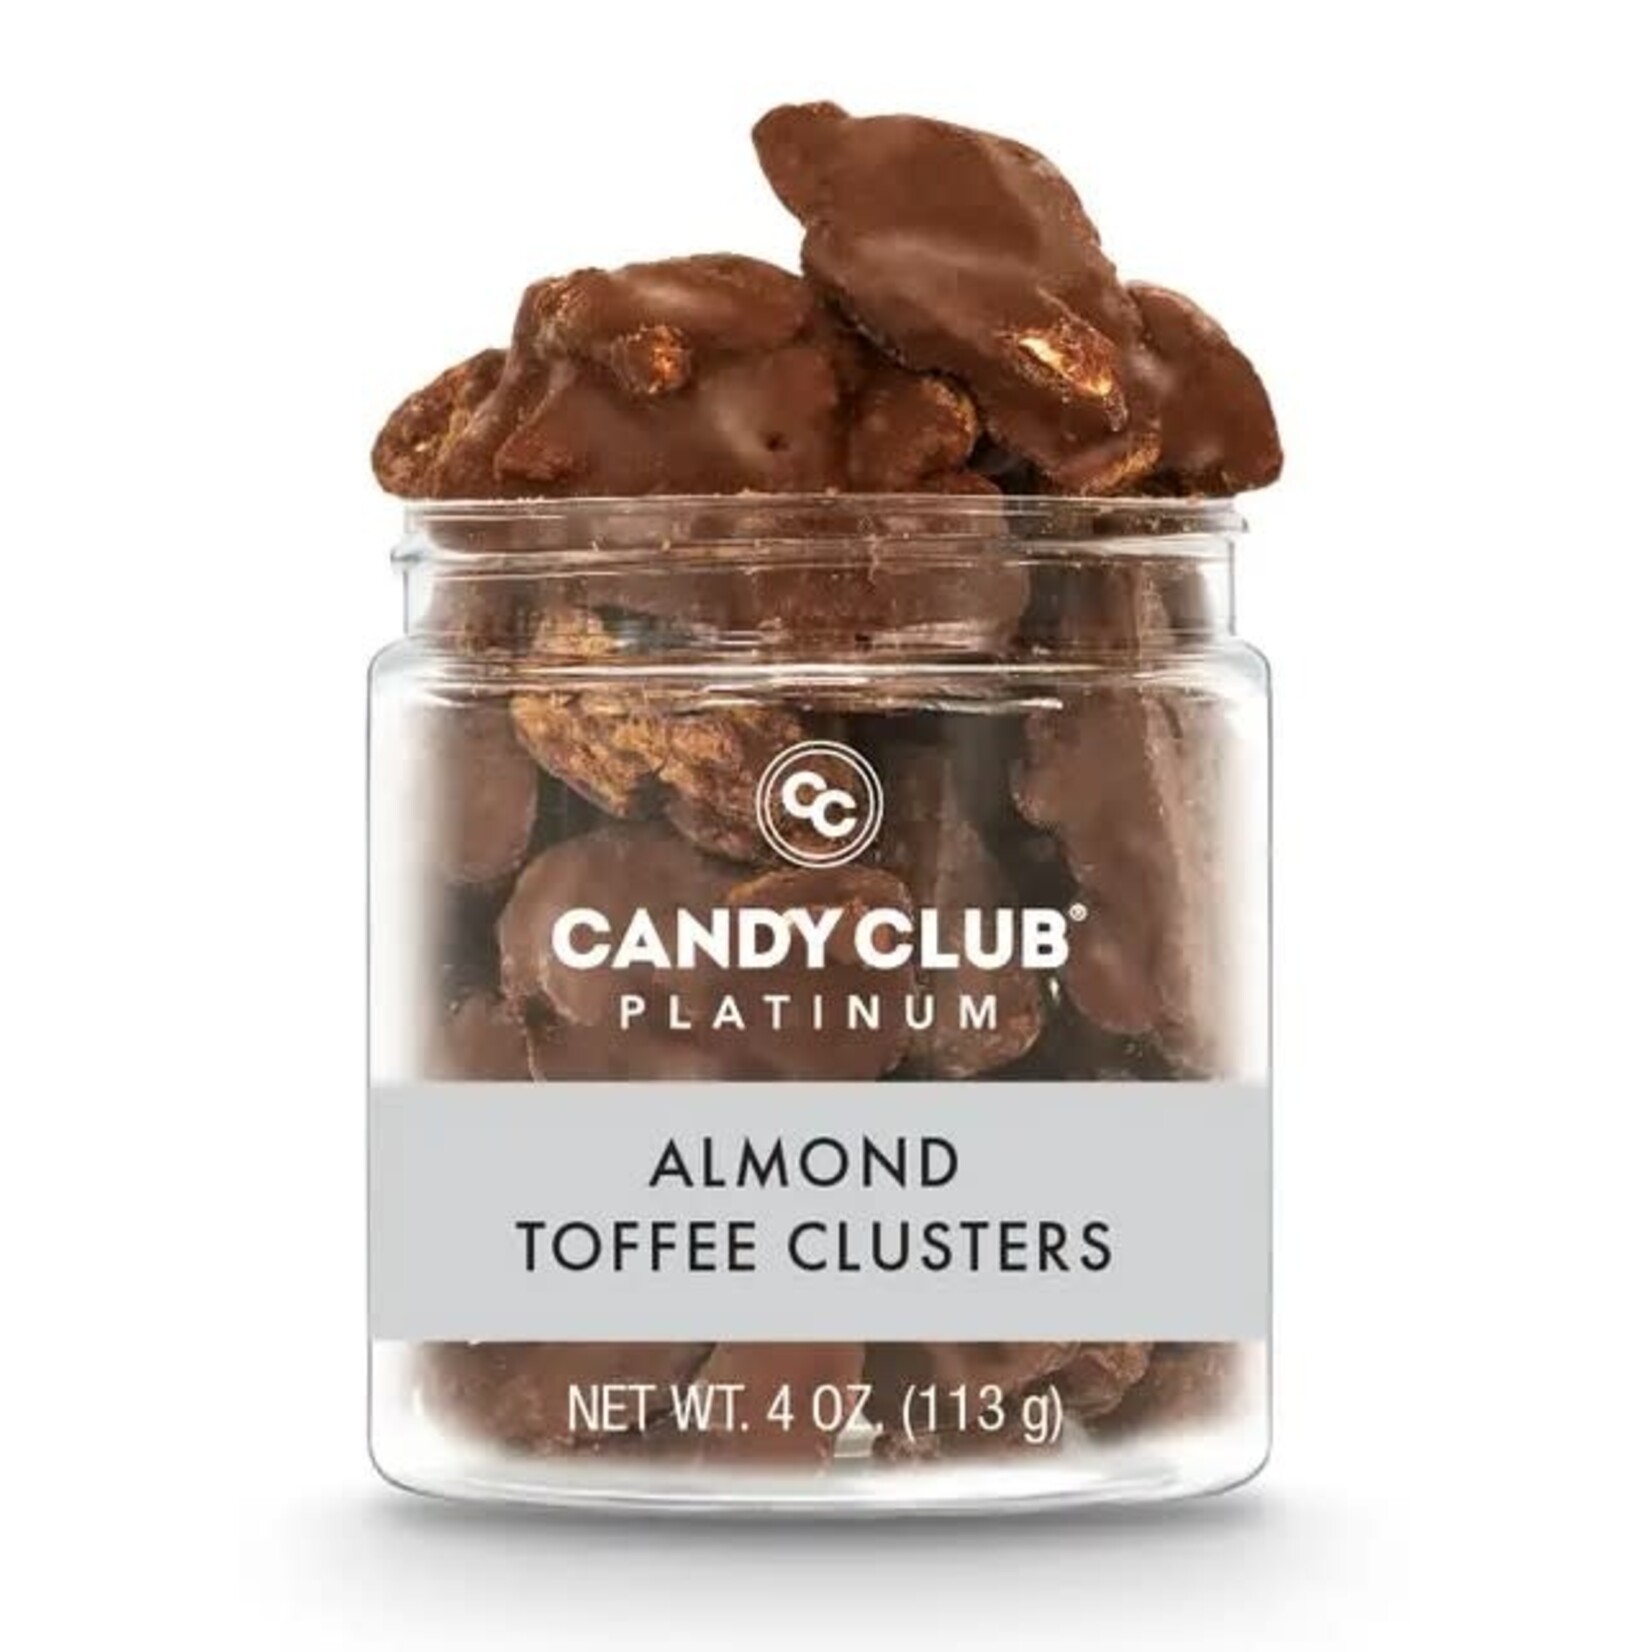 Candy Club Almond Toffee Clusters